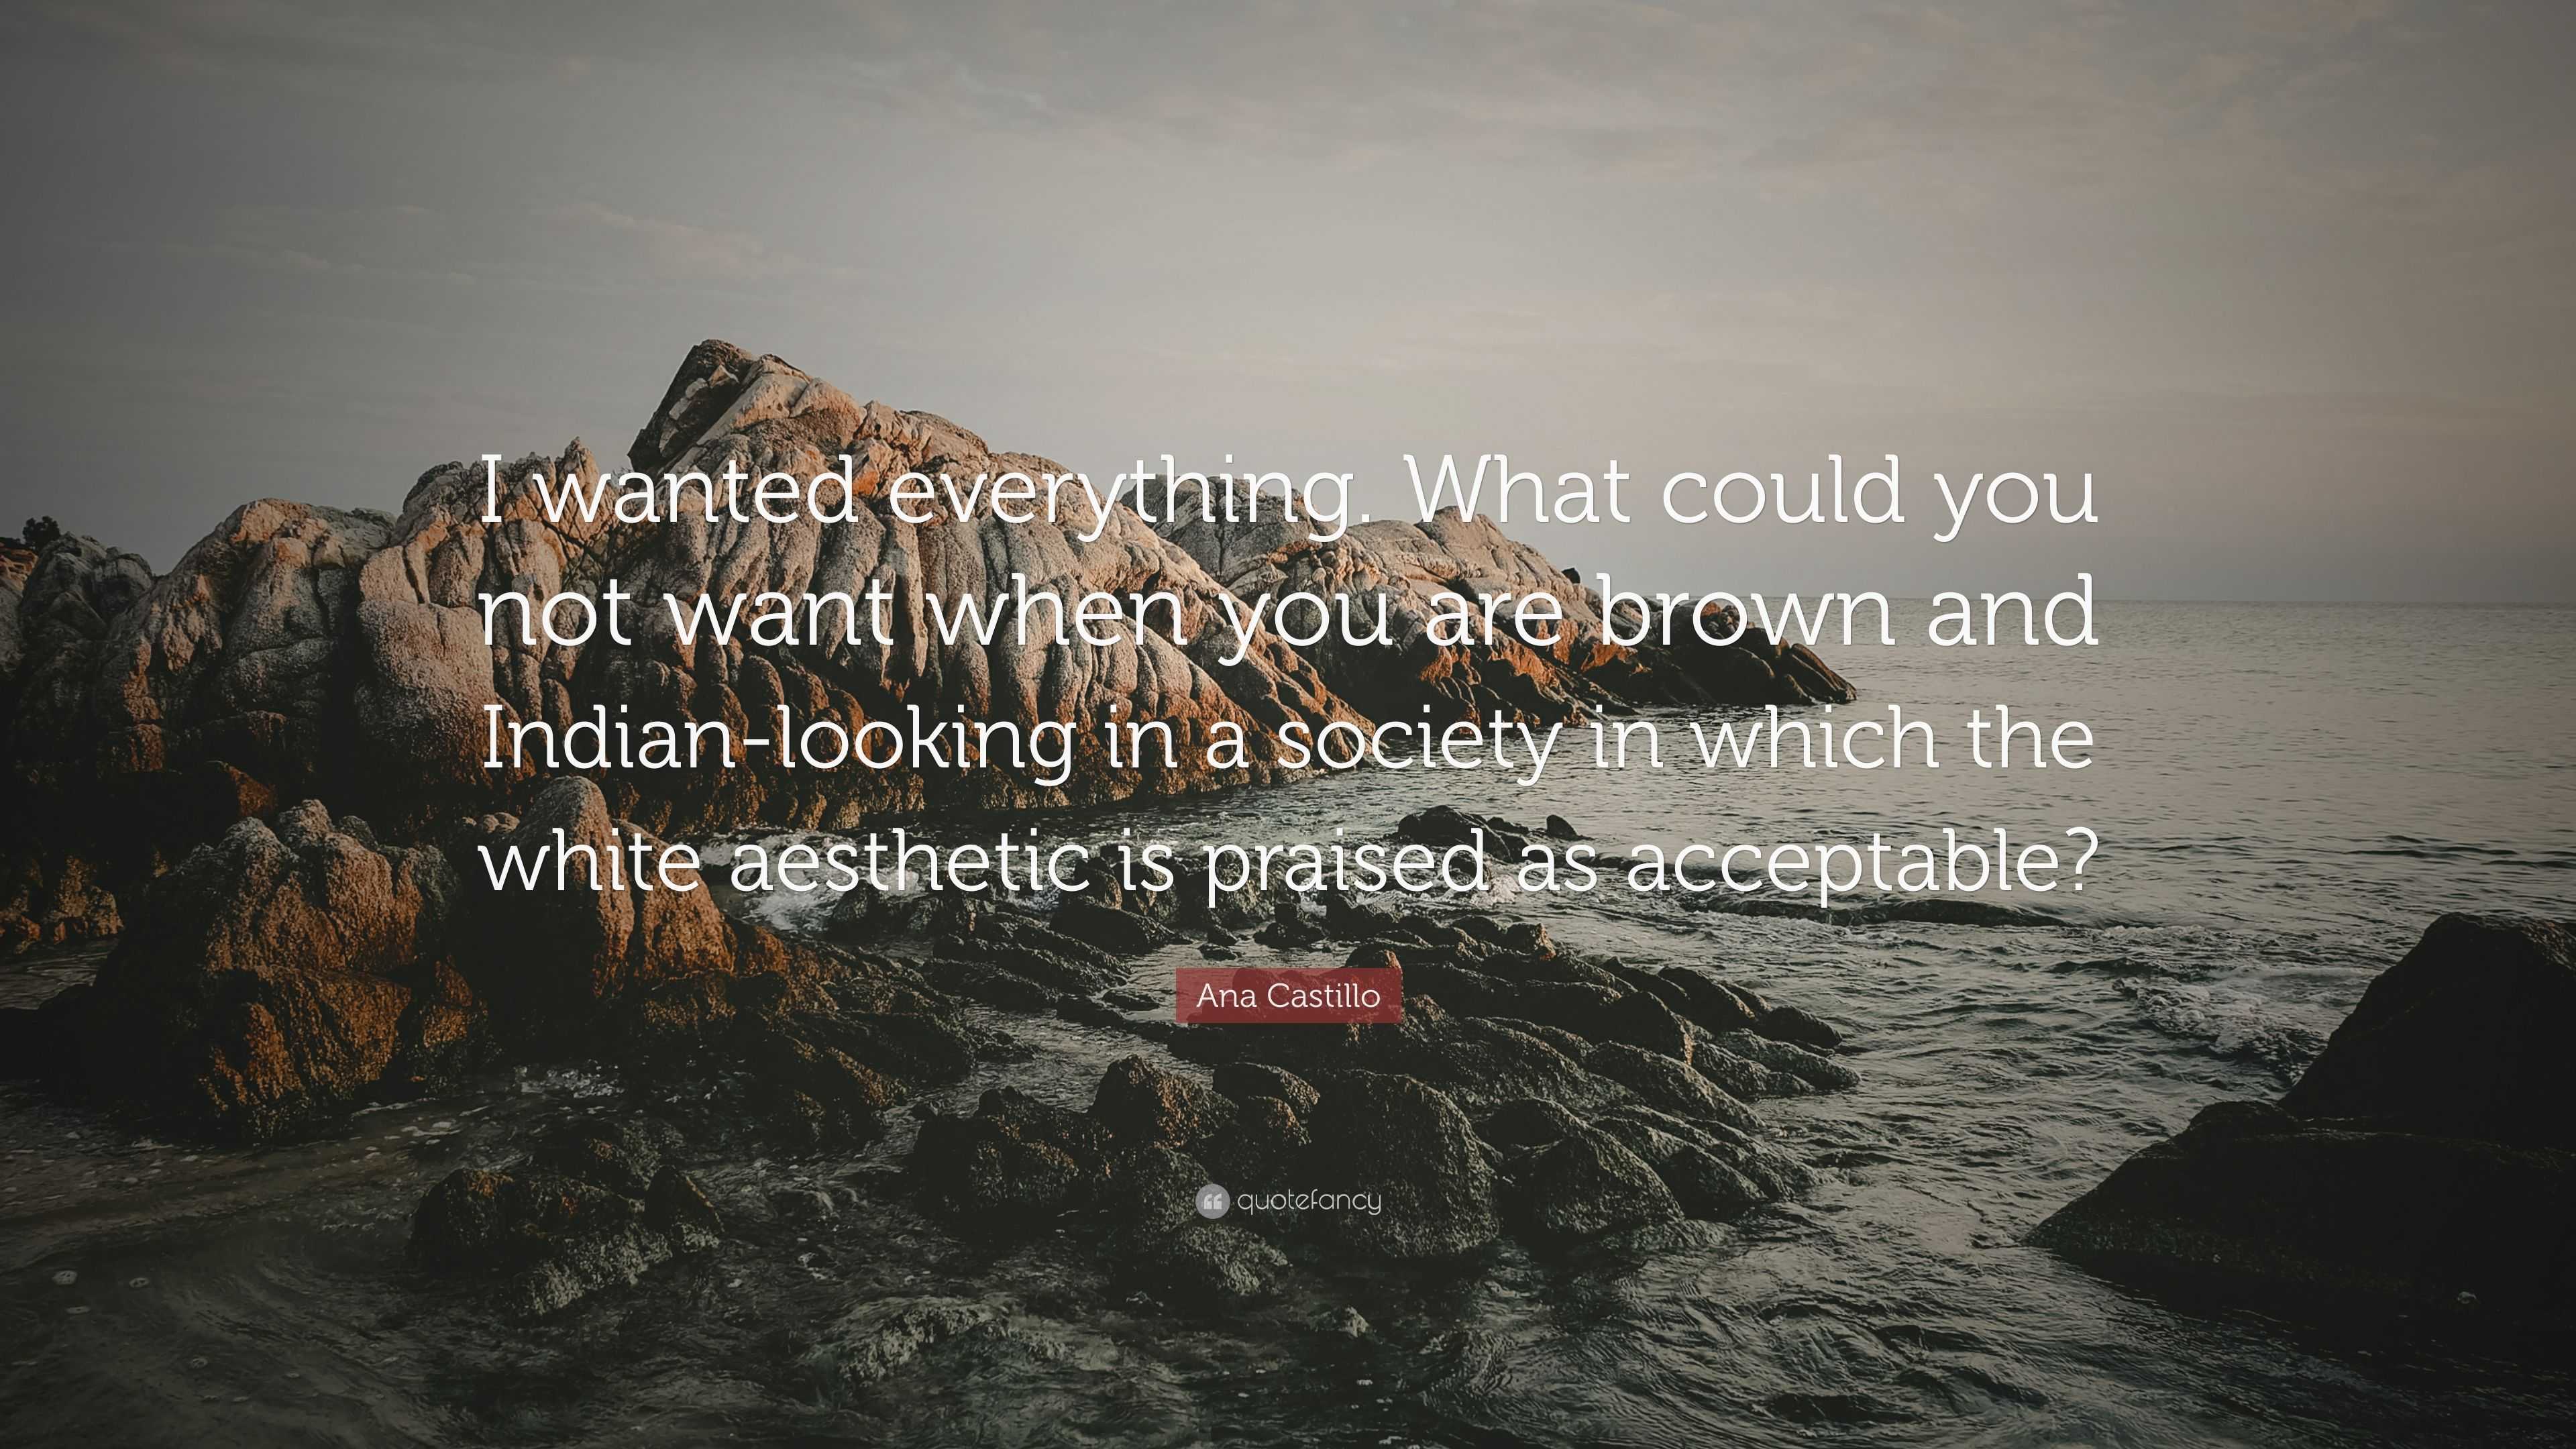 Ana Castillo Quote I Wanted Everything What Could You Not Want When You Are Brown And Indian Looking In A Society In Which The White Aesth 7 Wallpapers Quotefancy